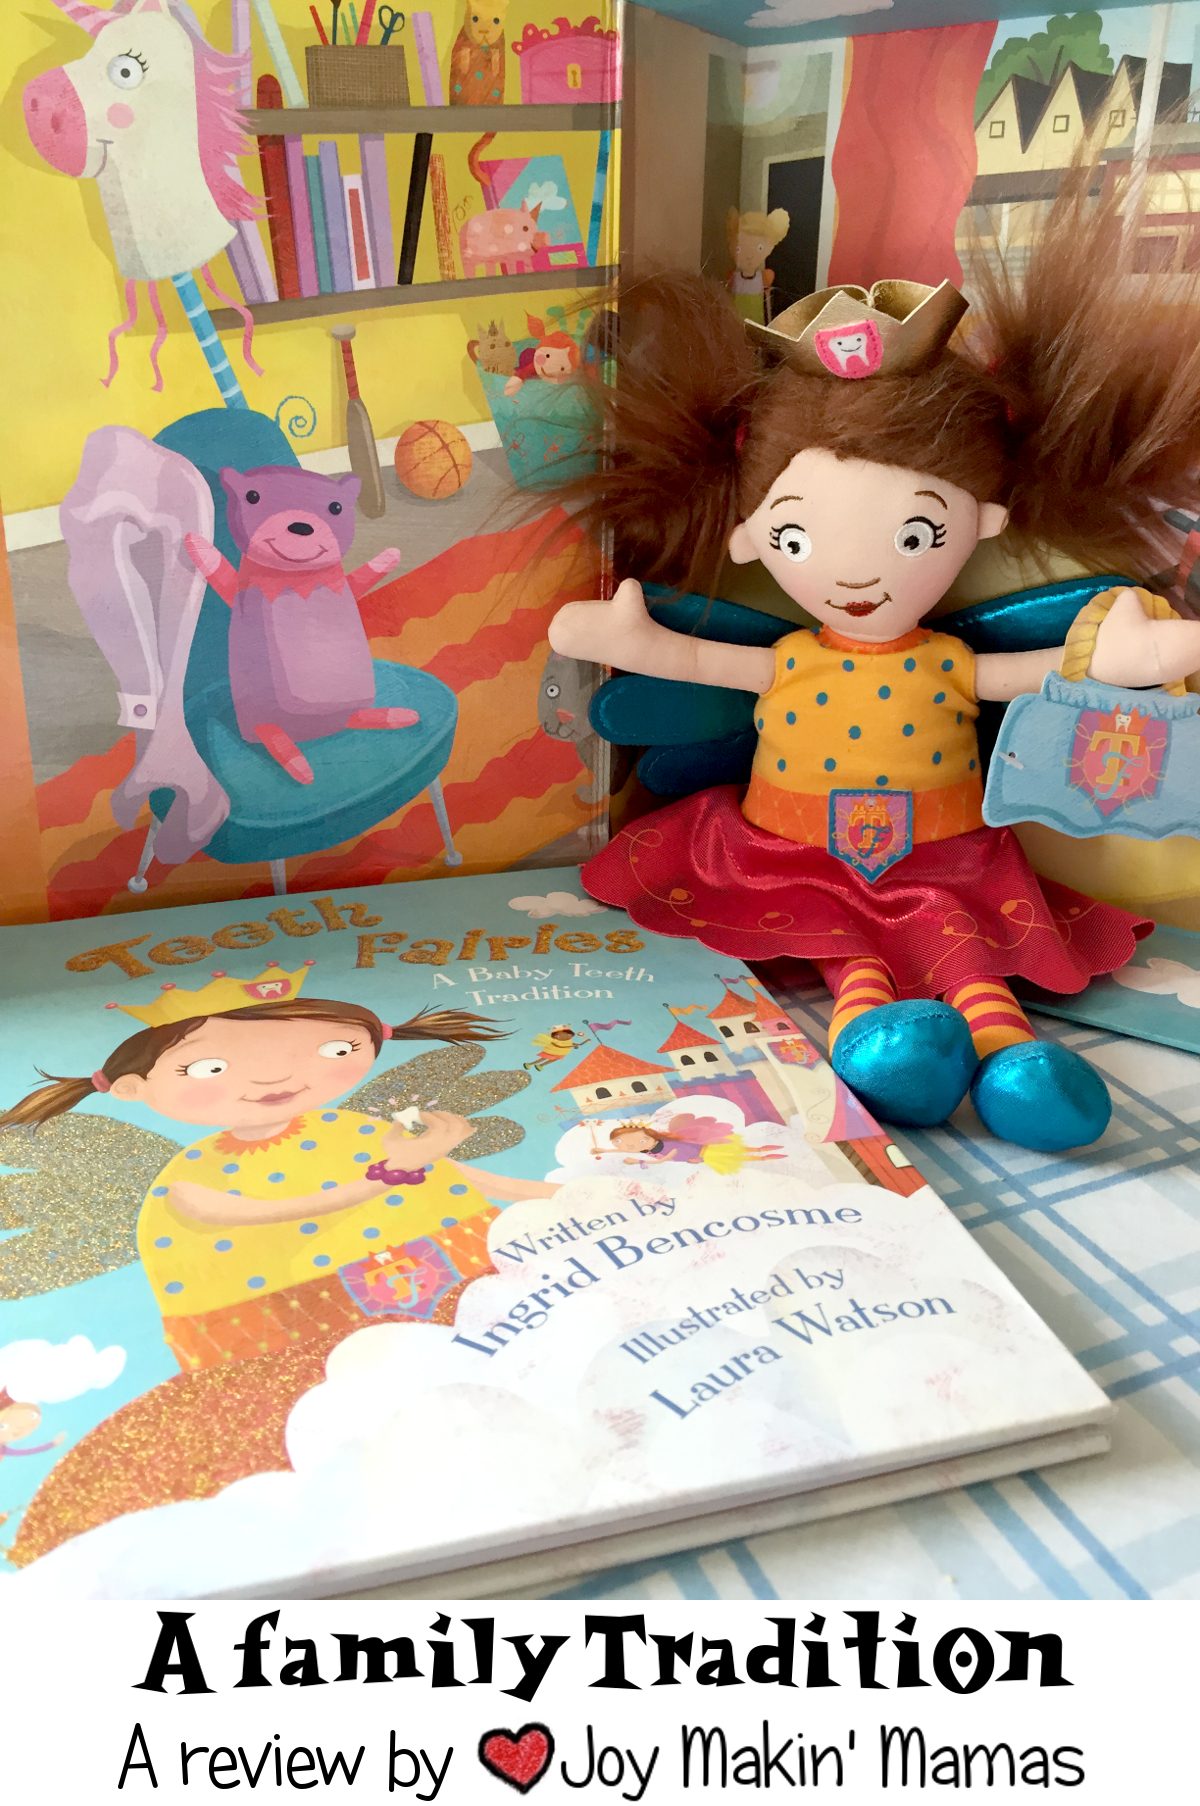 Teeth Fairies by Ingrid Bencosme A family tradition: #review by Joy Makin' Mamas